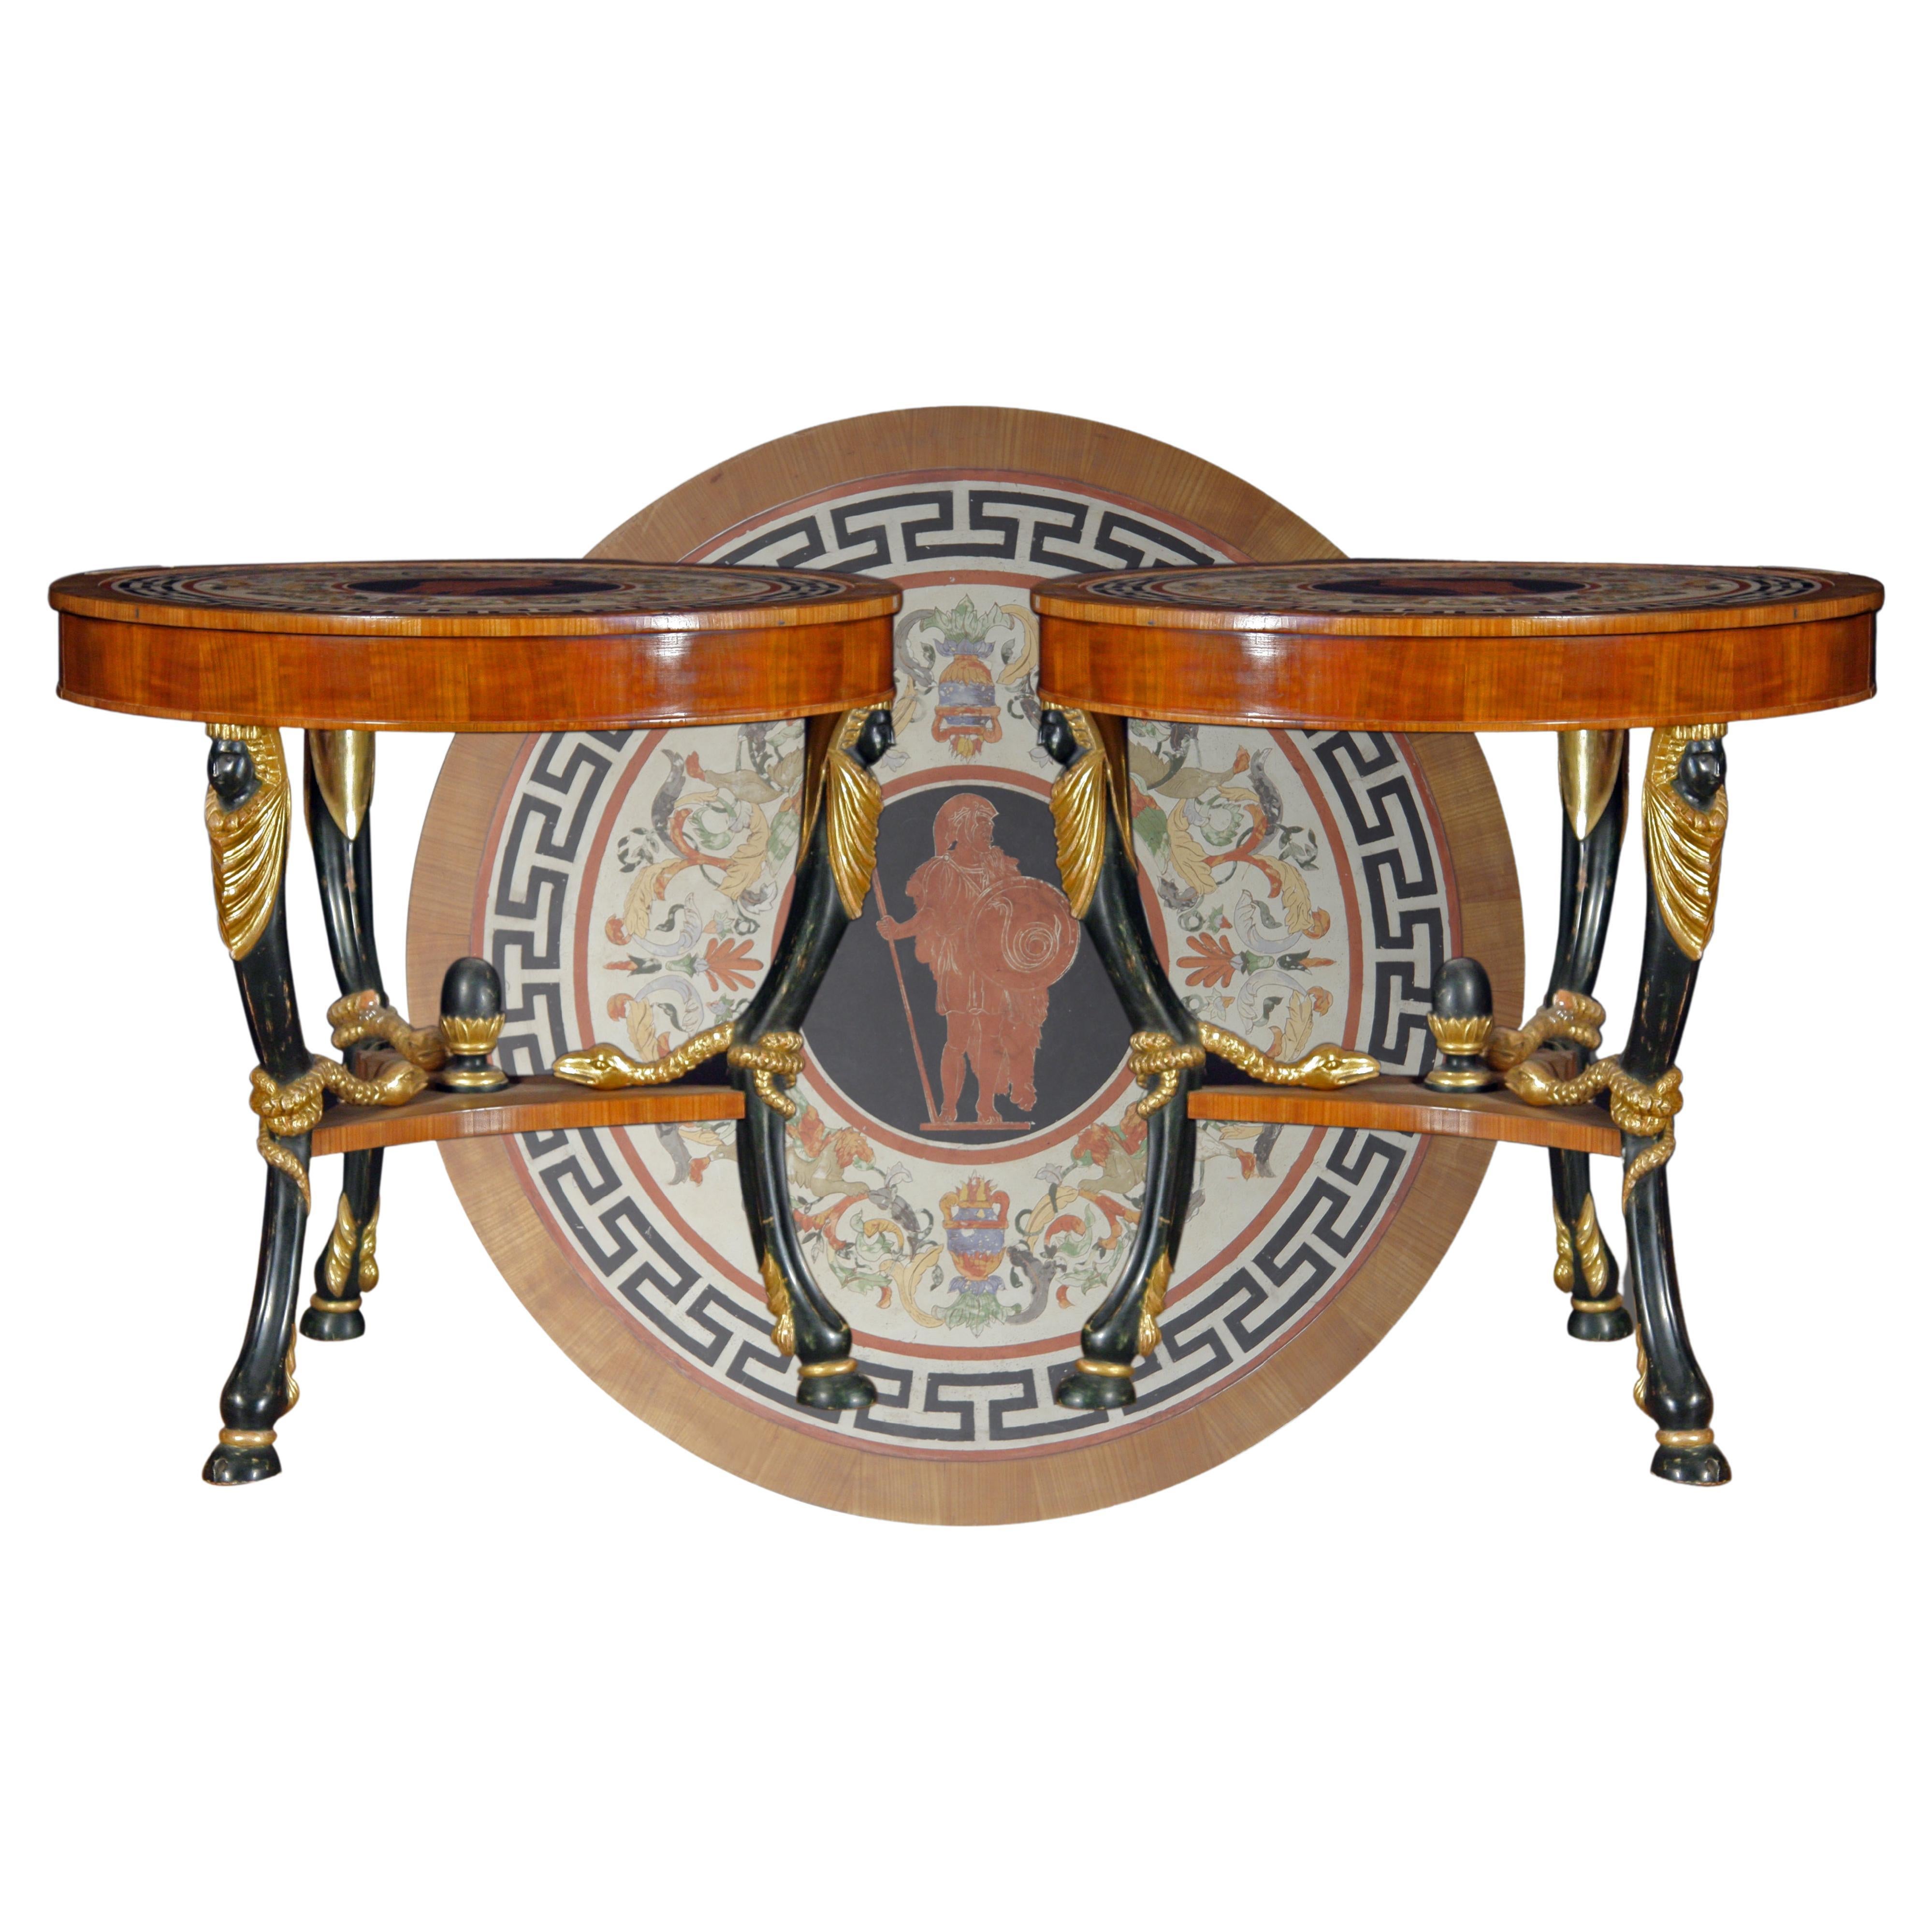 Pair of Tables in Empire Style with Ebonized Inlaid and Gilded "Ram's Foot" Legs